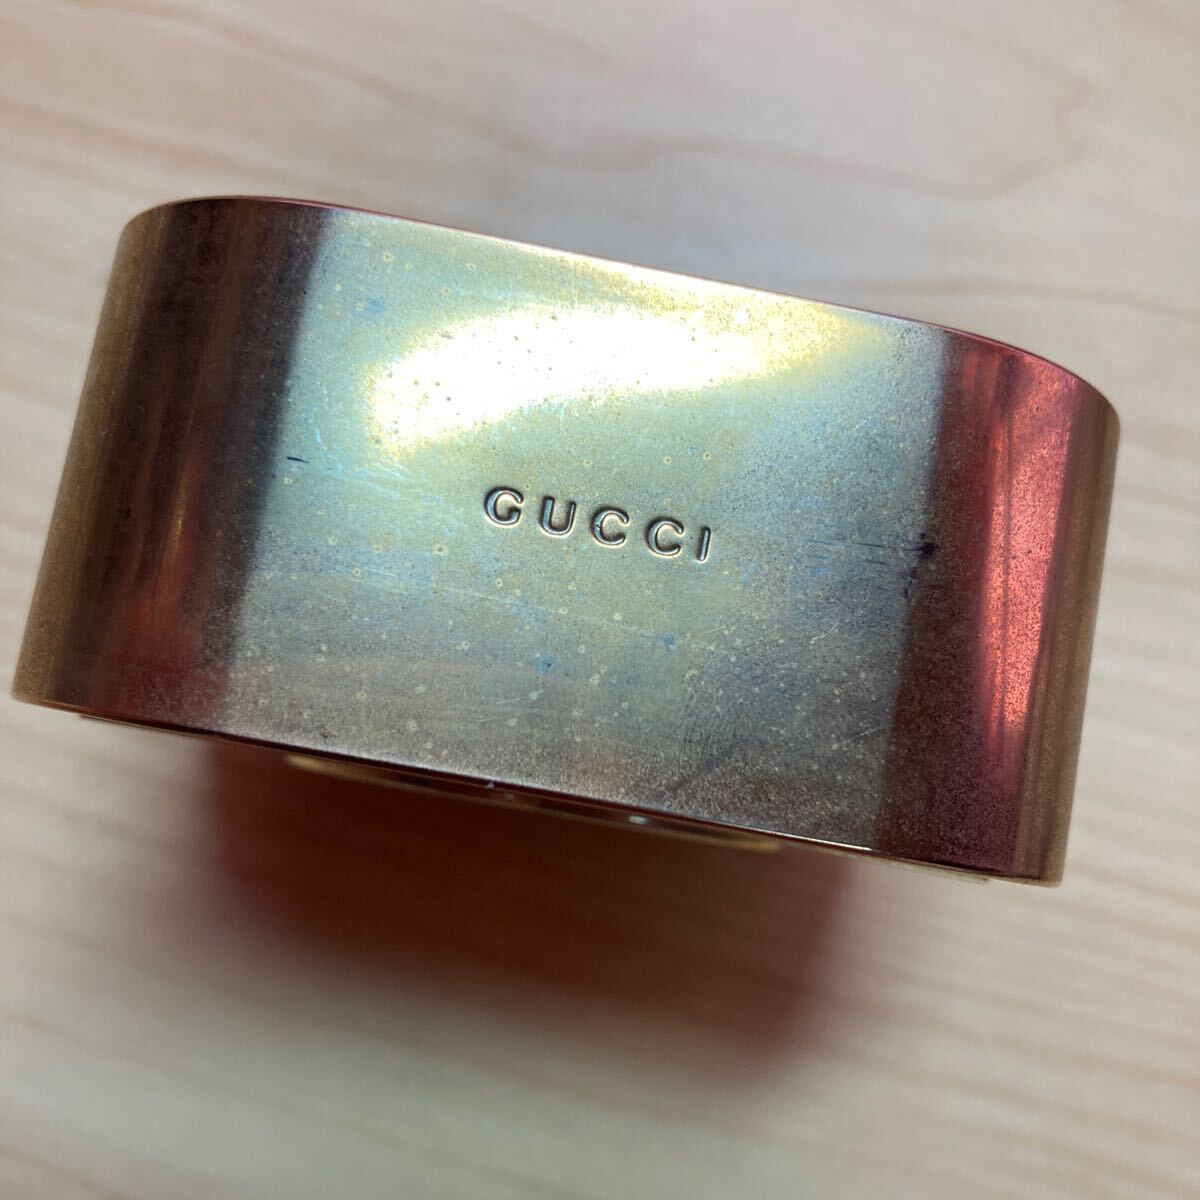  Gucci Guilty o-doto crack perfume 30ml GUCCI GUILTY EDT rare fragrance puff .-m lady's brand lady's men's 